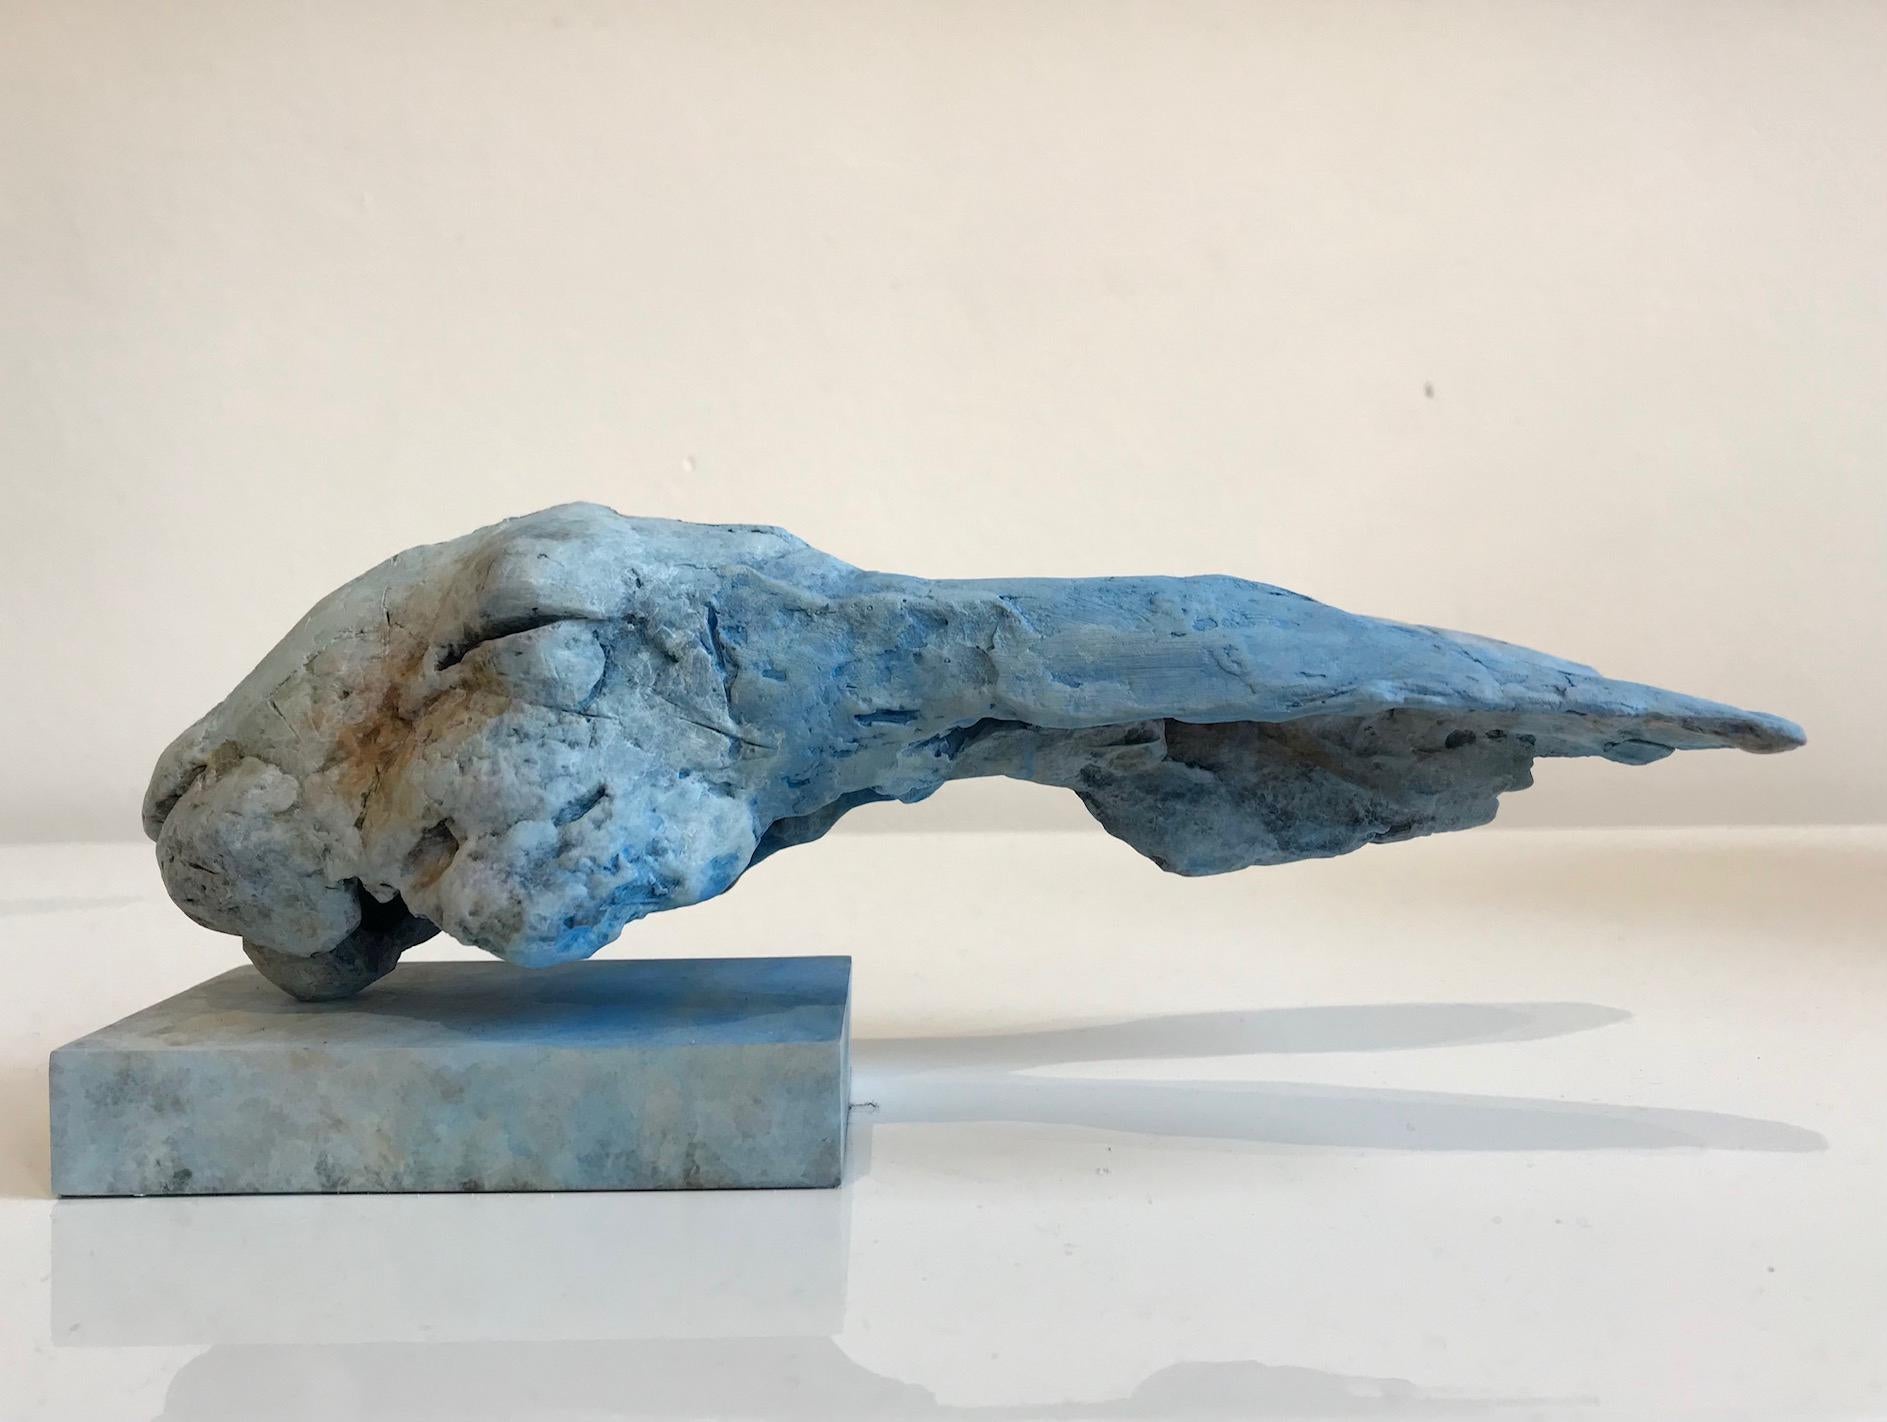 Nichola Theakston (1967) has established herself as one of the UK’s foremost contemporary sculptors working within the animal genre. 

With the ''Elysian Hare'' Nichola shows how exquisite she can capture the feelings and expressions in an animal.